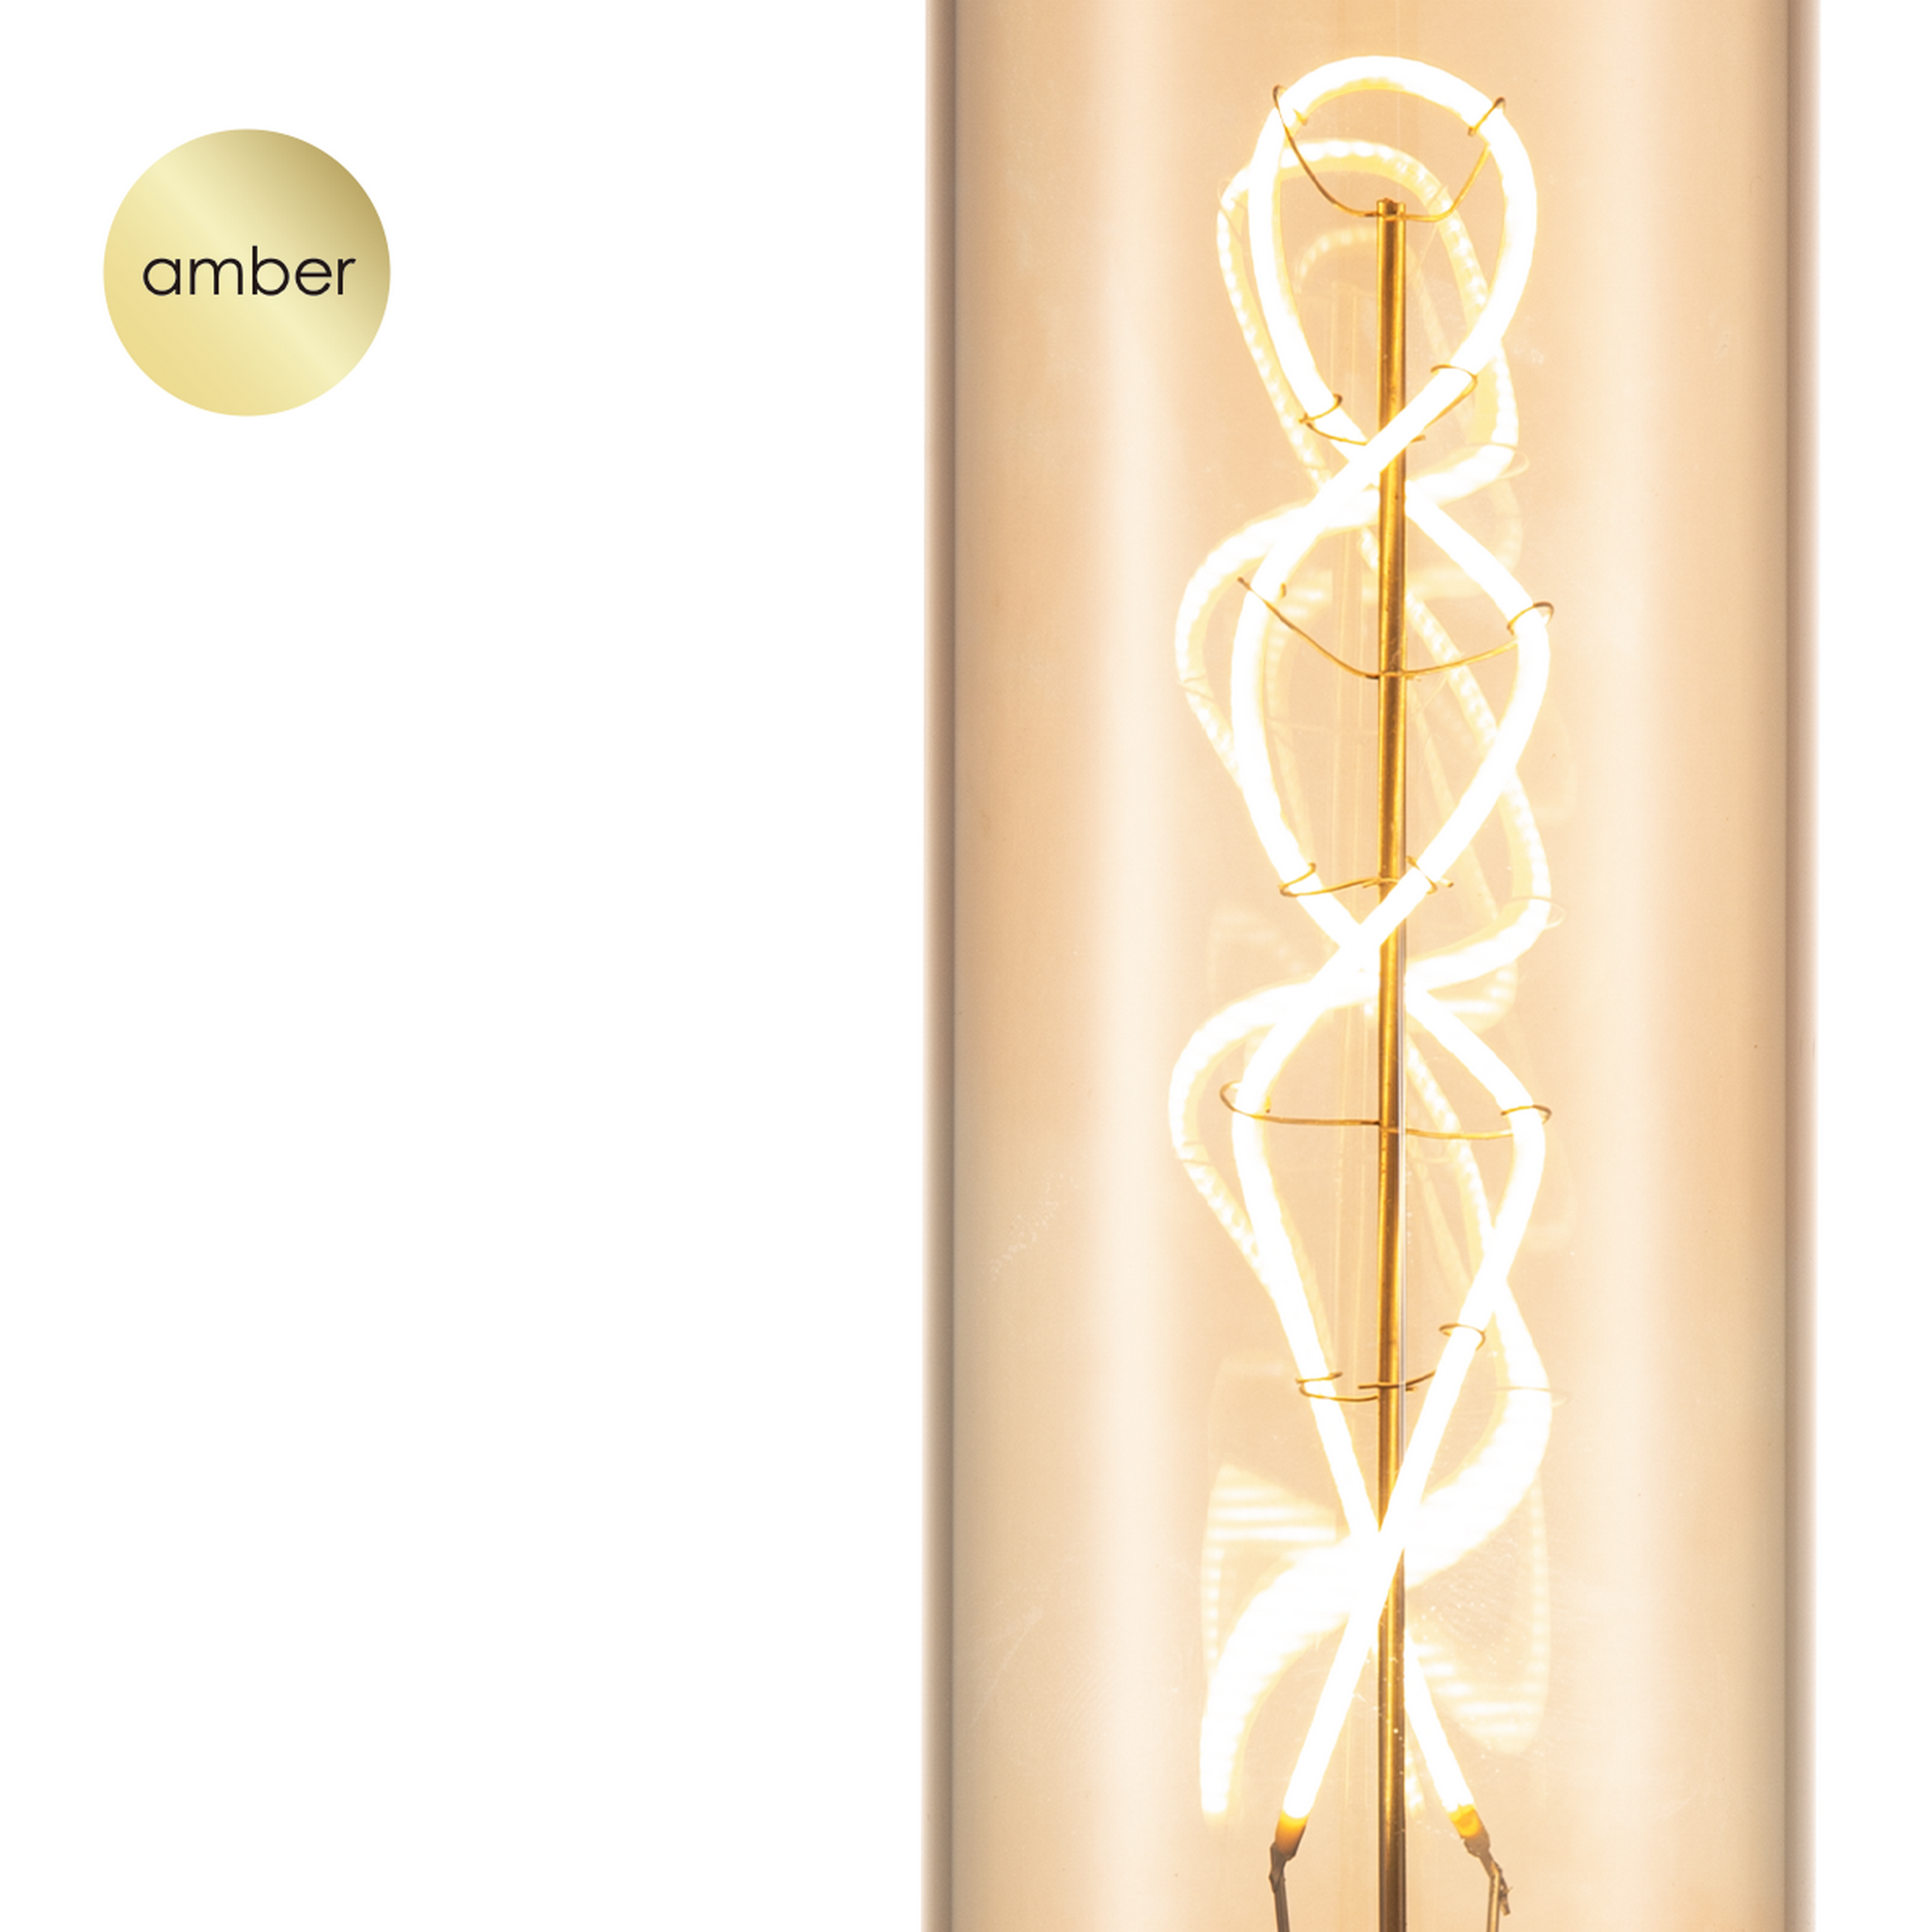 LED-Leuchtmittel 'Tube Spiral' amber 4 W 280 lm + product picture